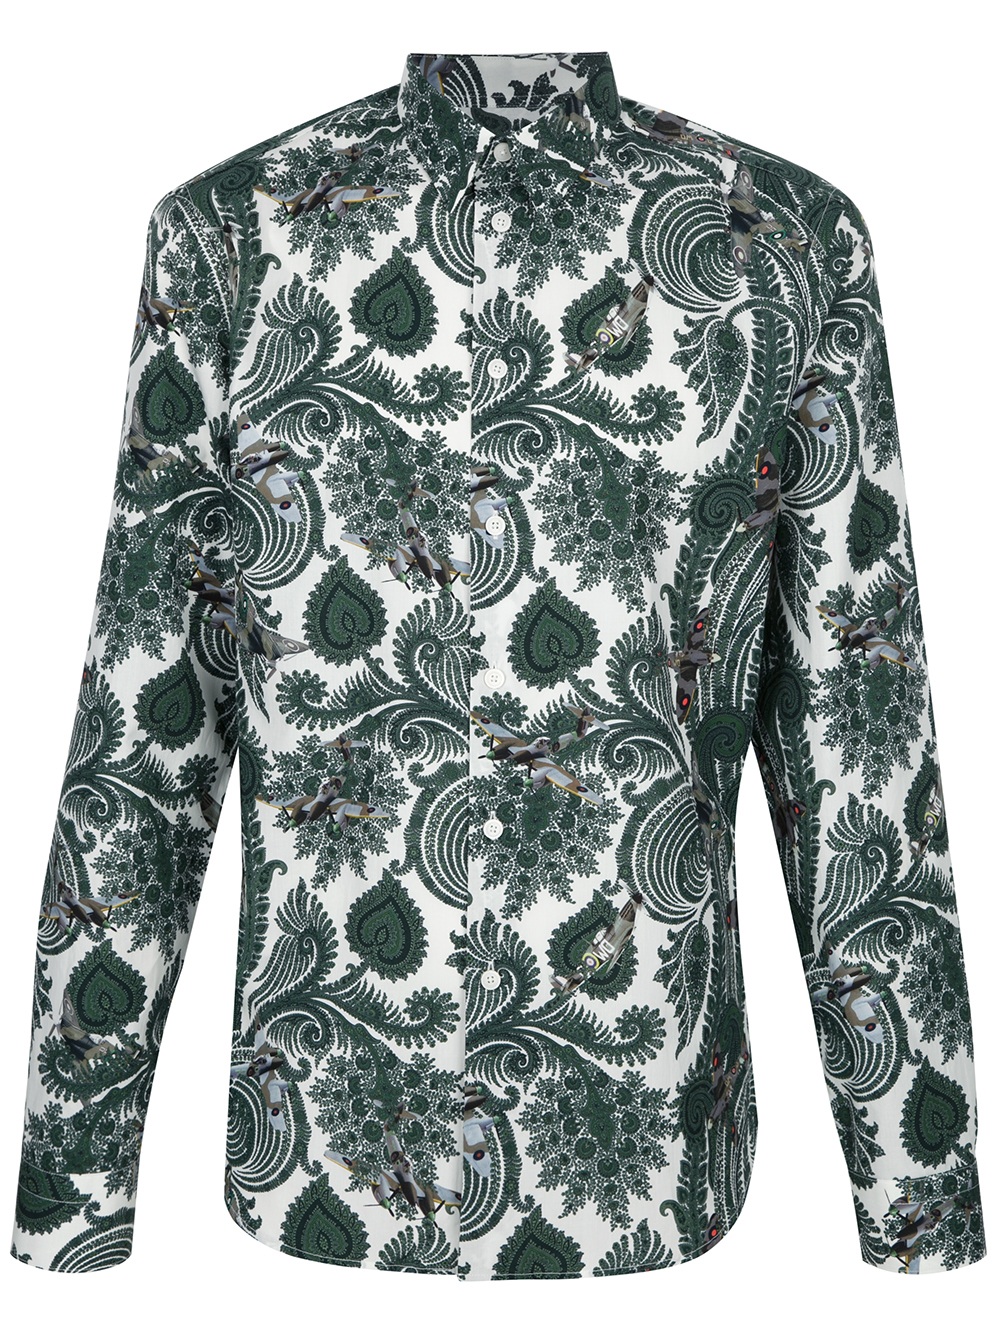 Givenchy Paisley Print Shirt in Green for Men - Lyst